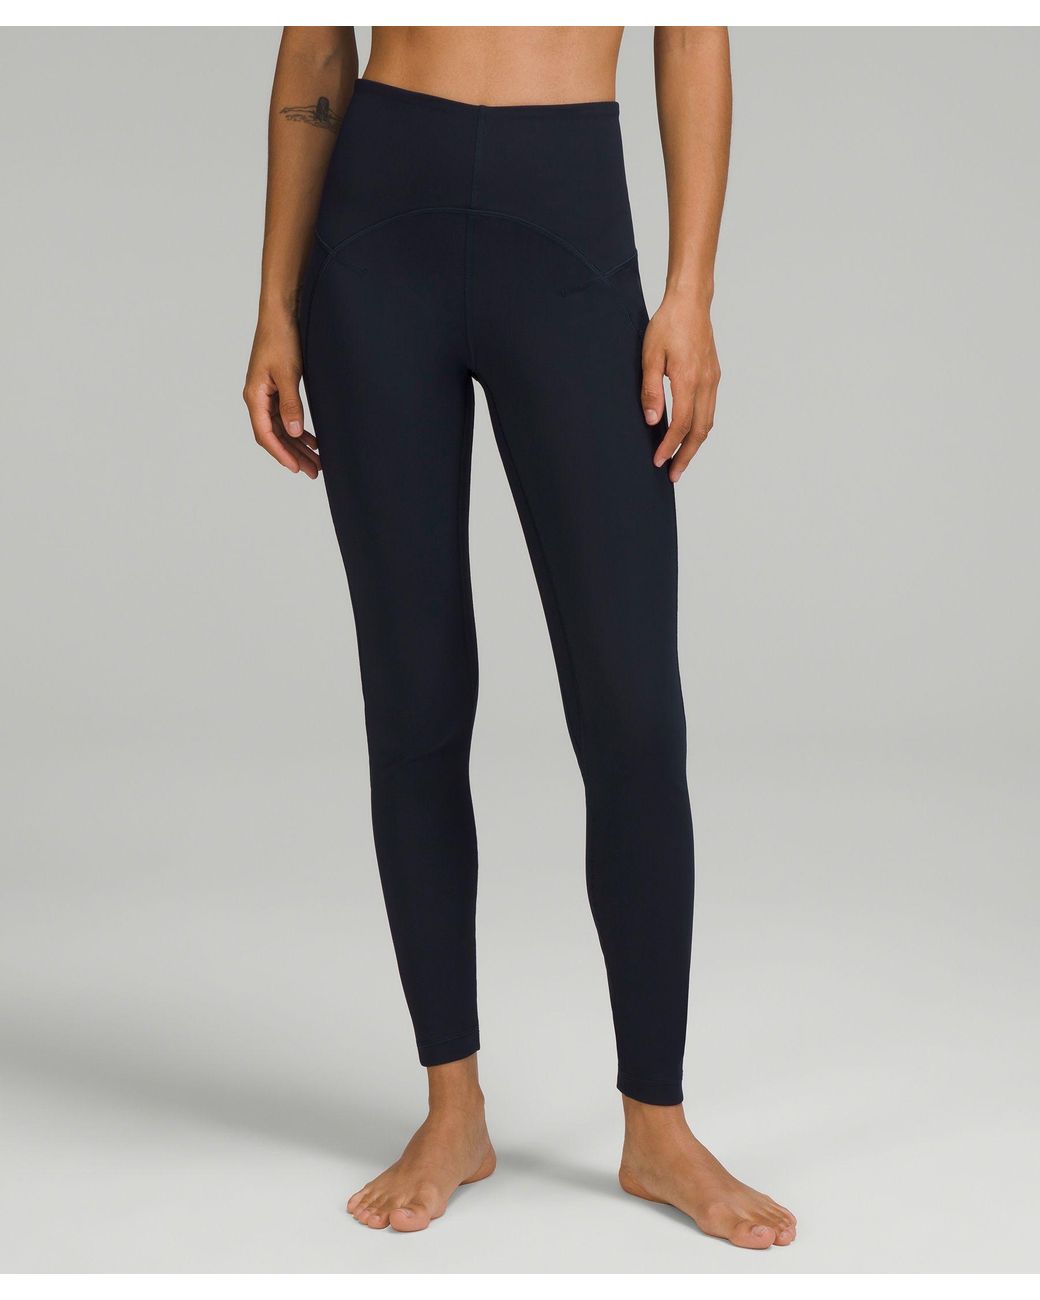 lululemon athletica Back-zip High-rise Paddle Tight 28 Online Only